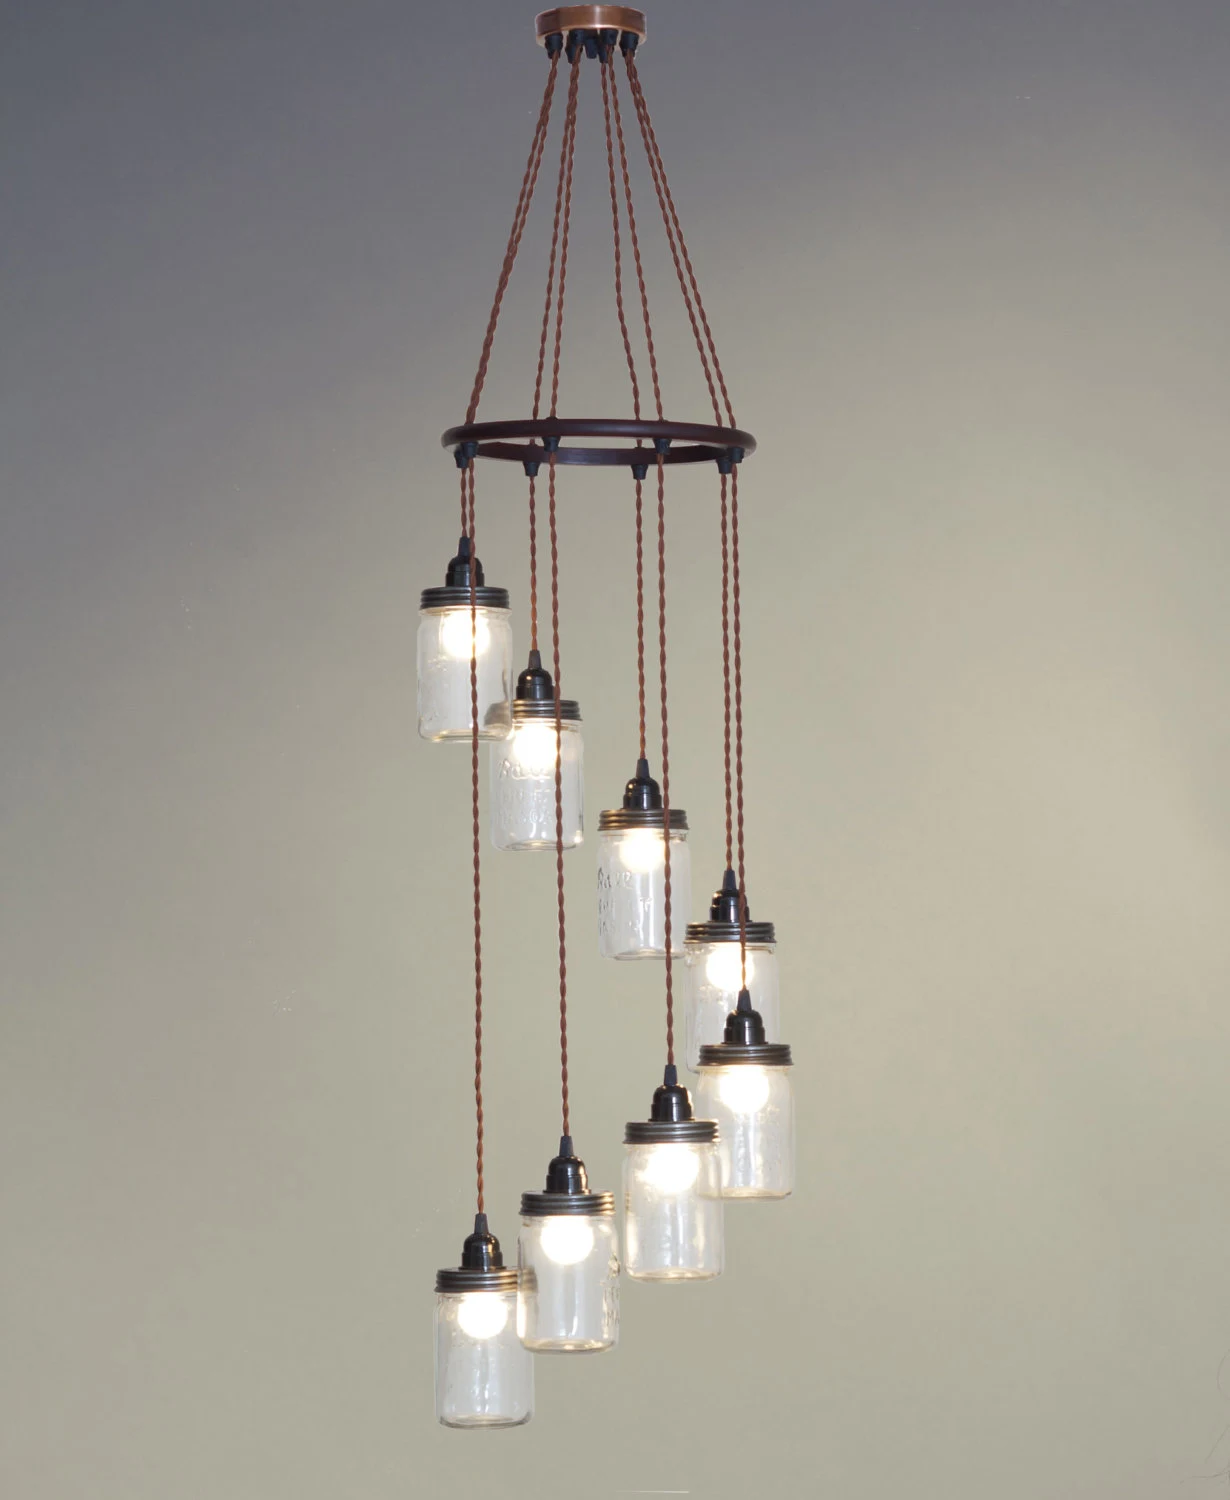 35 Unconventional Handmade Industrial Lighting Designs You Can Diy #327